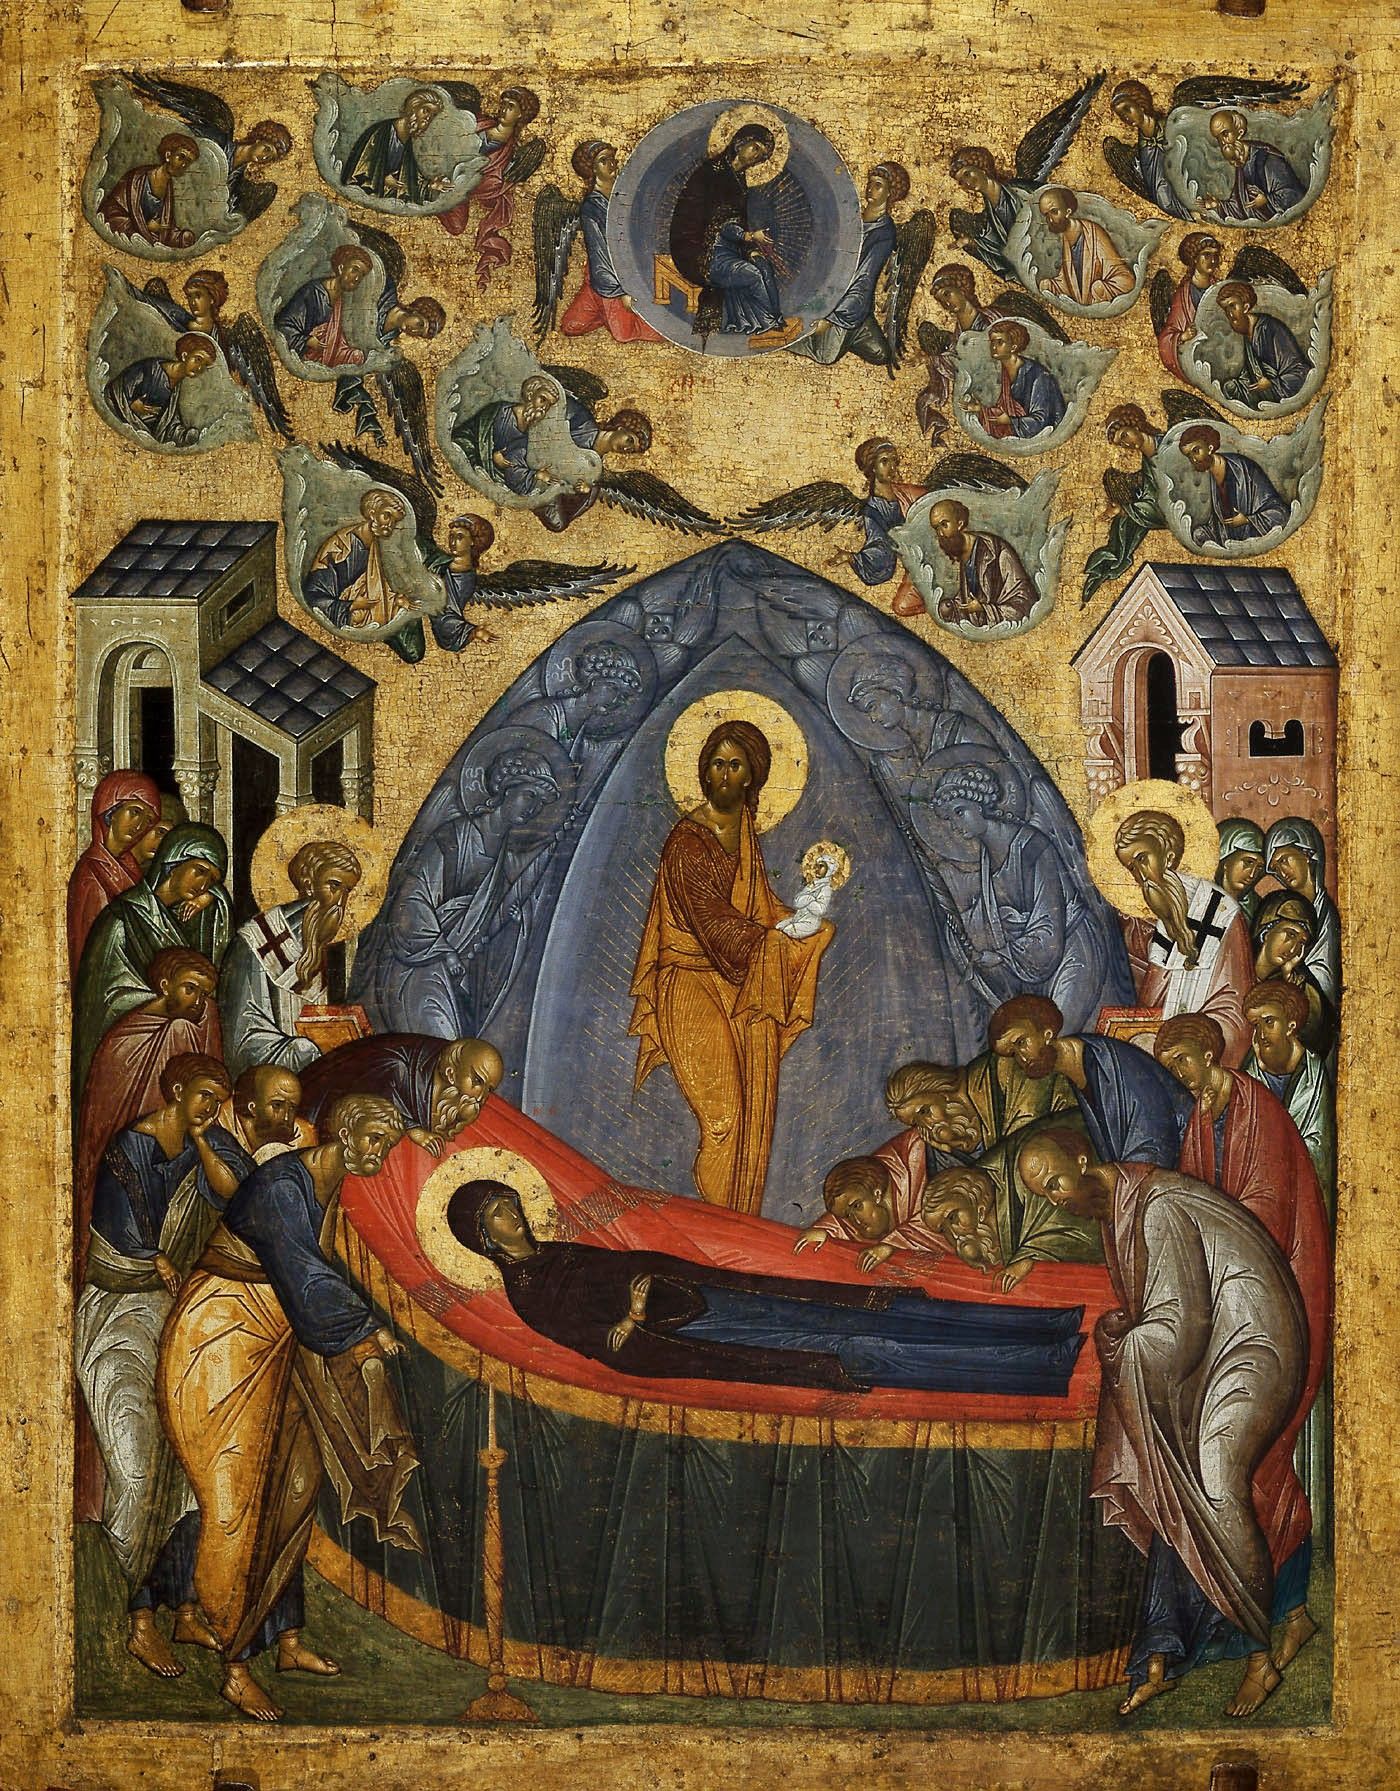 The Crown of Christ's Work - A Sermon for the Dormition of Our Most Holy Lady Theotokos (2021) - Holy Cross Monastery